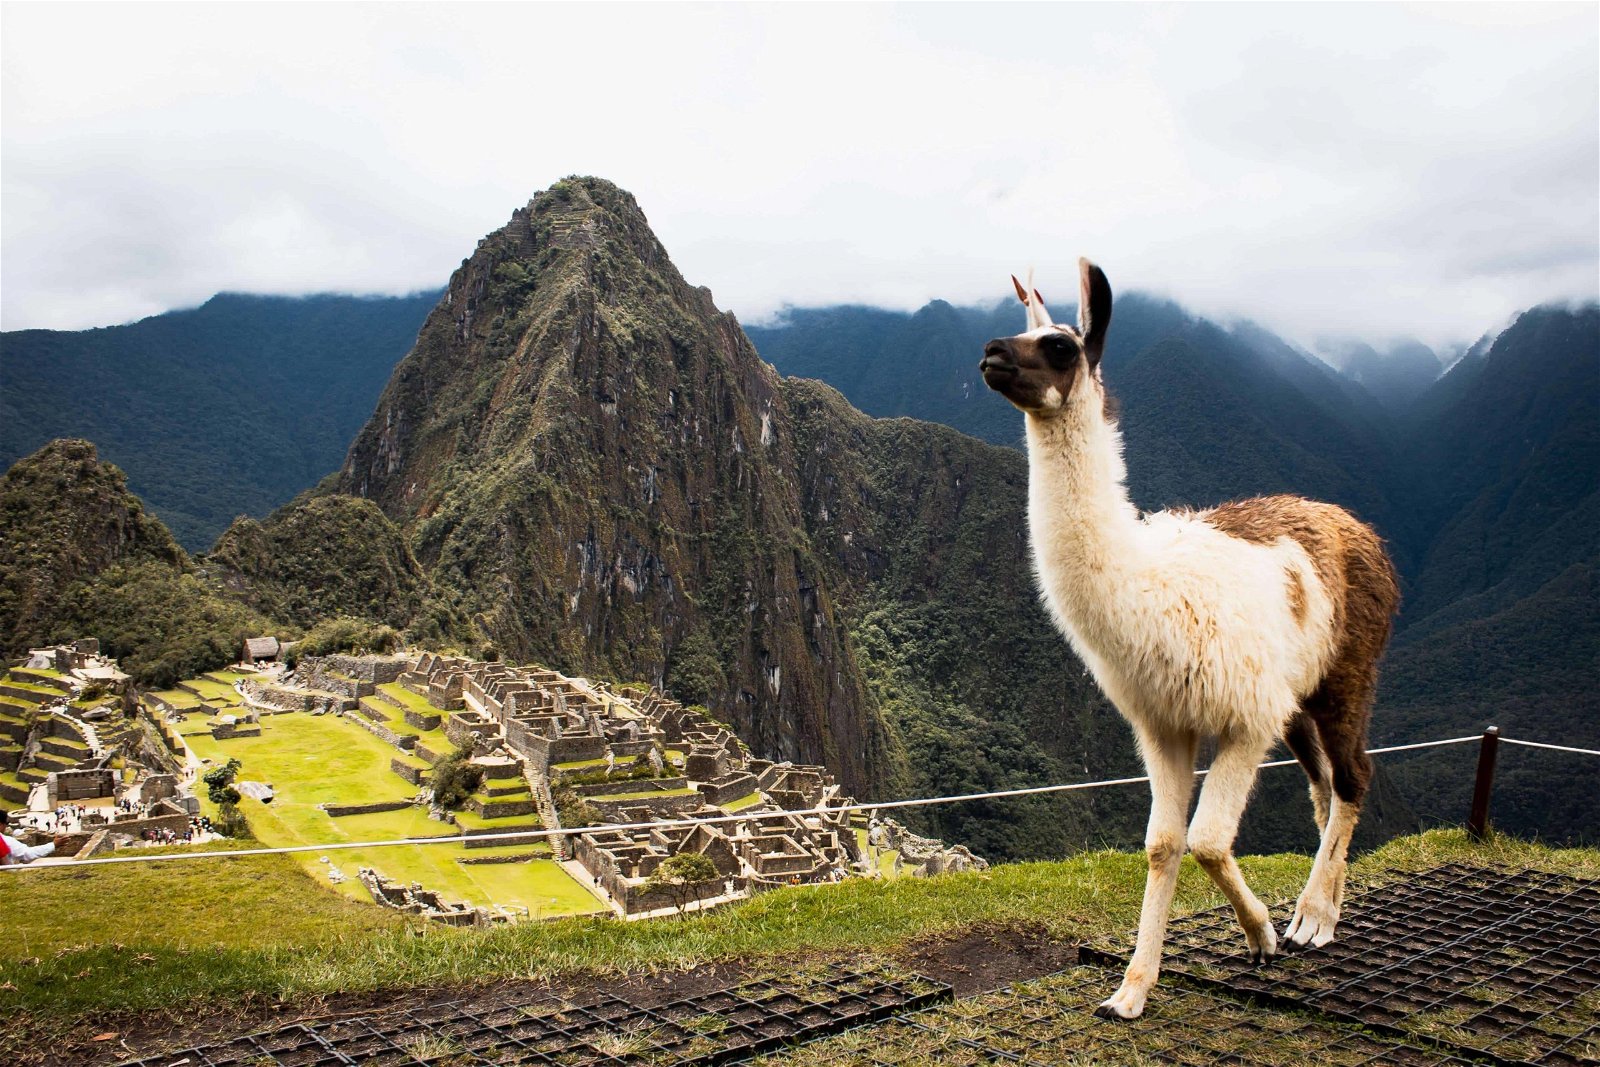 Have patience is the perfect photography tip for beginners. You'll be rewarded with great images like this llama in front of Machu Picchu.